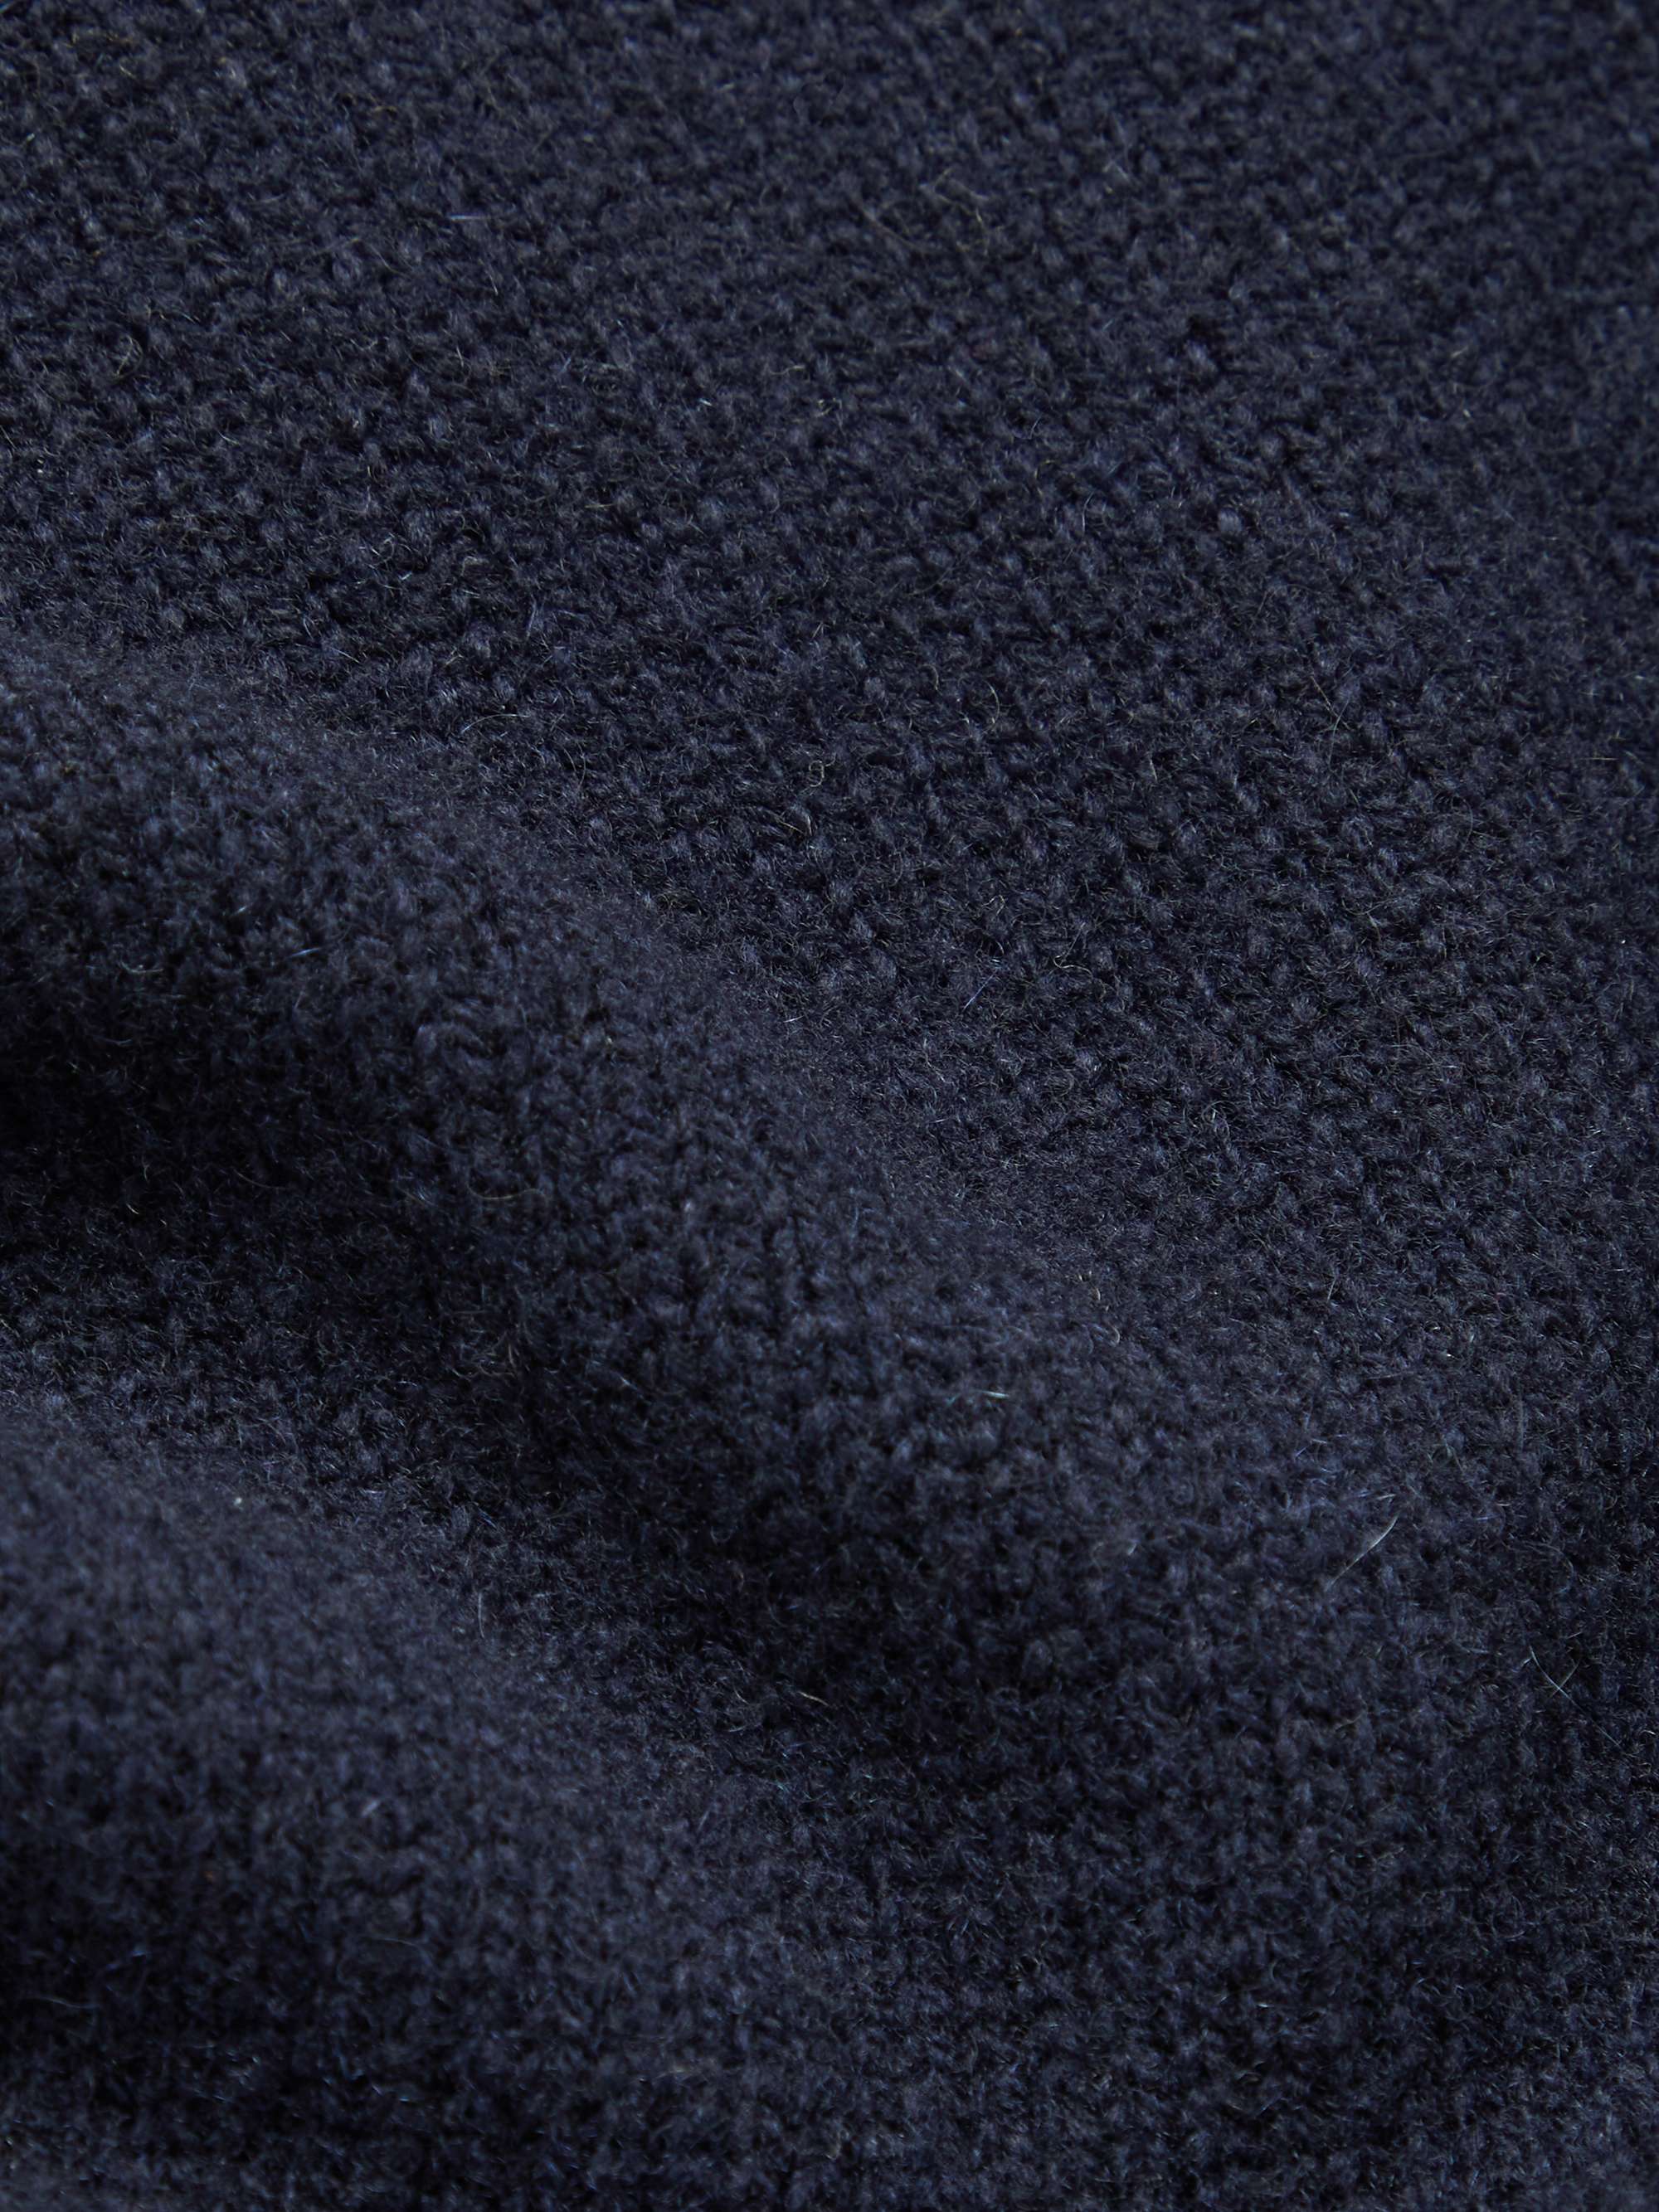 THE ROW Sibem Wool and Cashmere-Blend Sweater